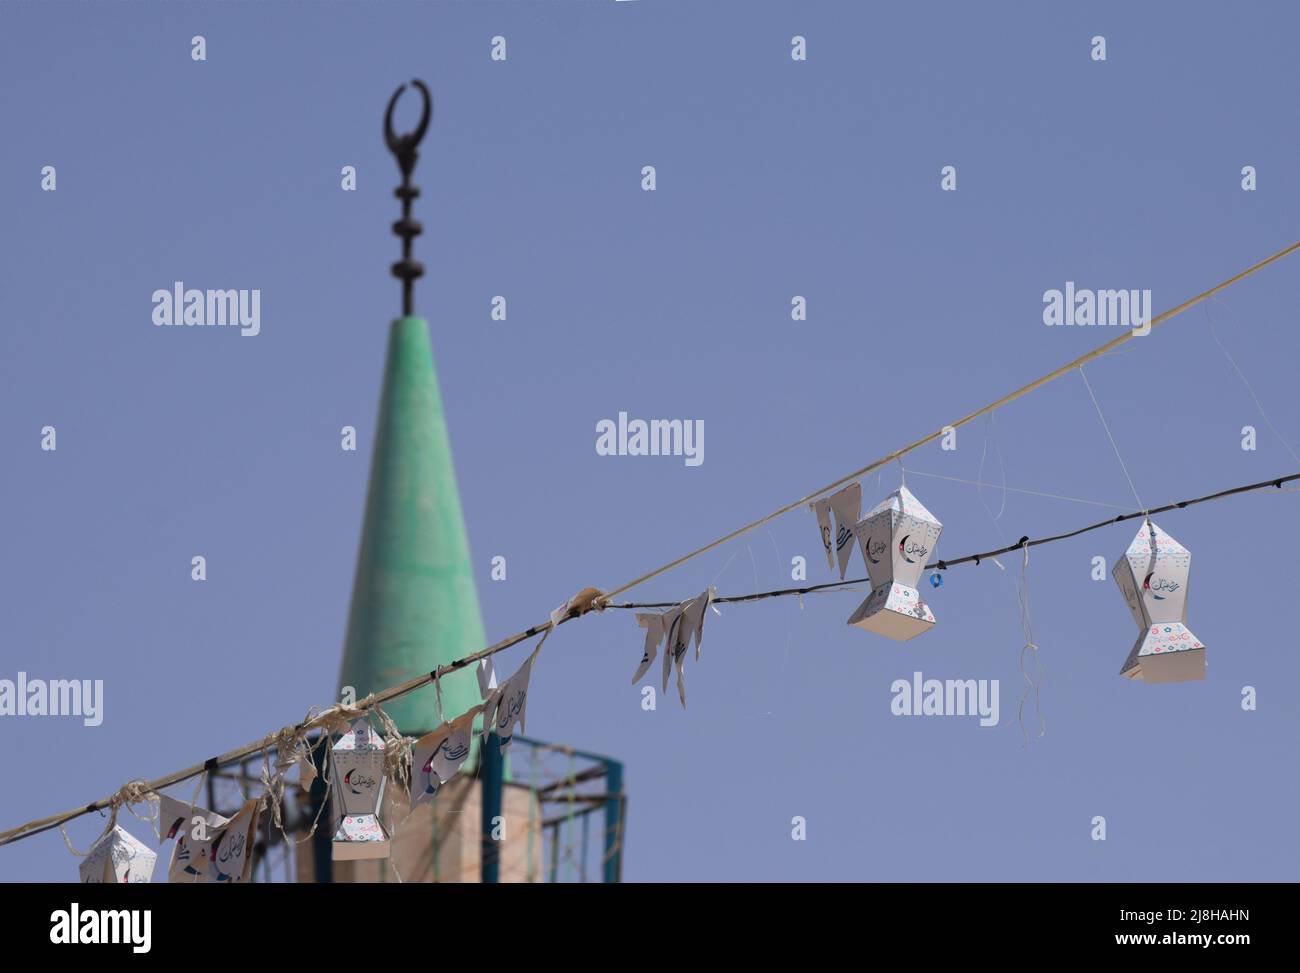 Hanging Ramadan lantern street decorations with the minaret of a mosque in the background against a blue sky in Jordan in the Middle East Stock Photo